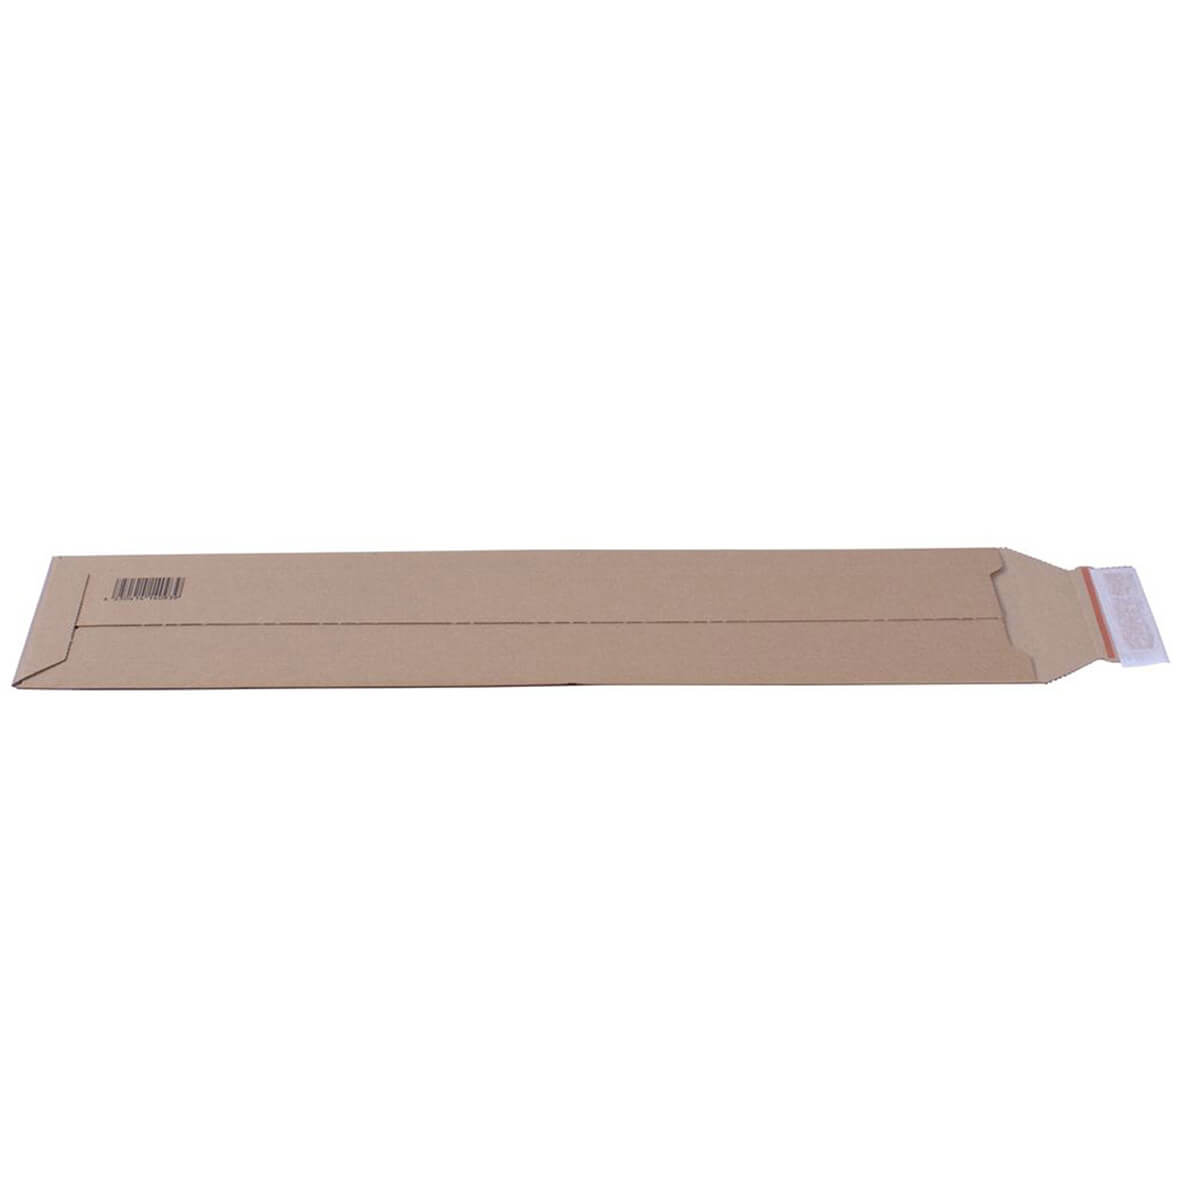 Shipping bag - solid cardboard, for number plates,  140 x 590 x 50mm